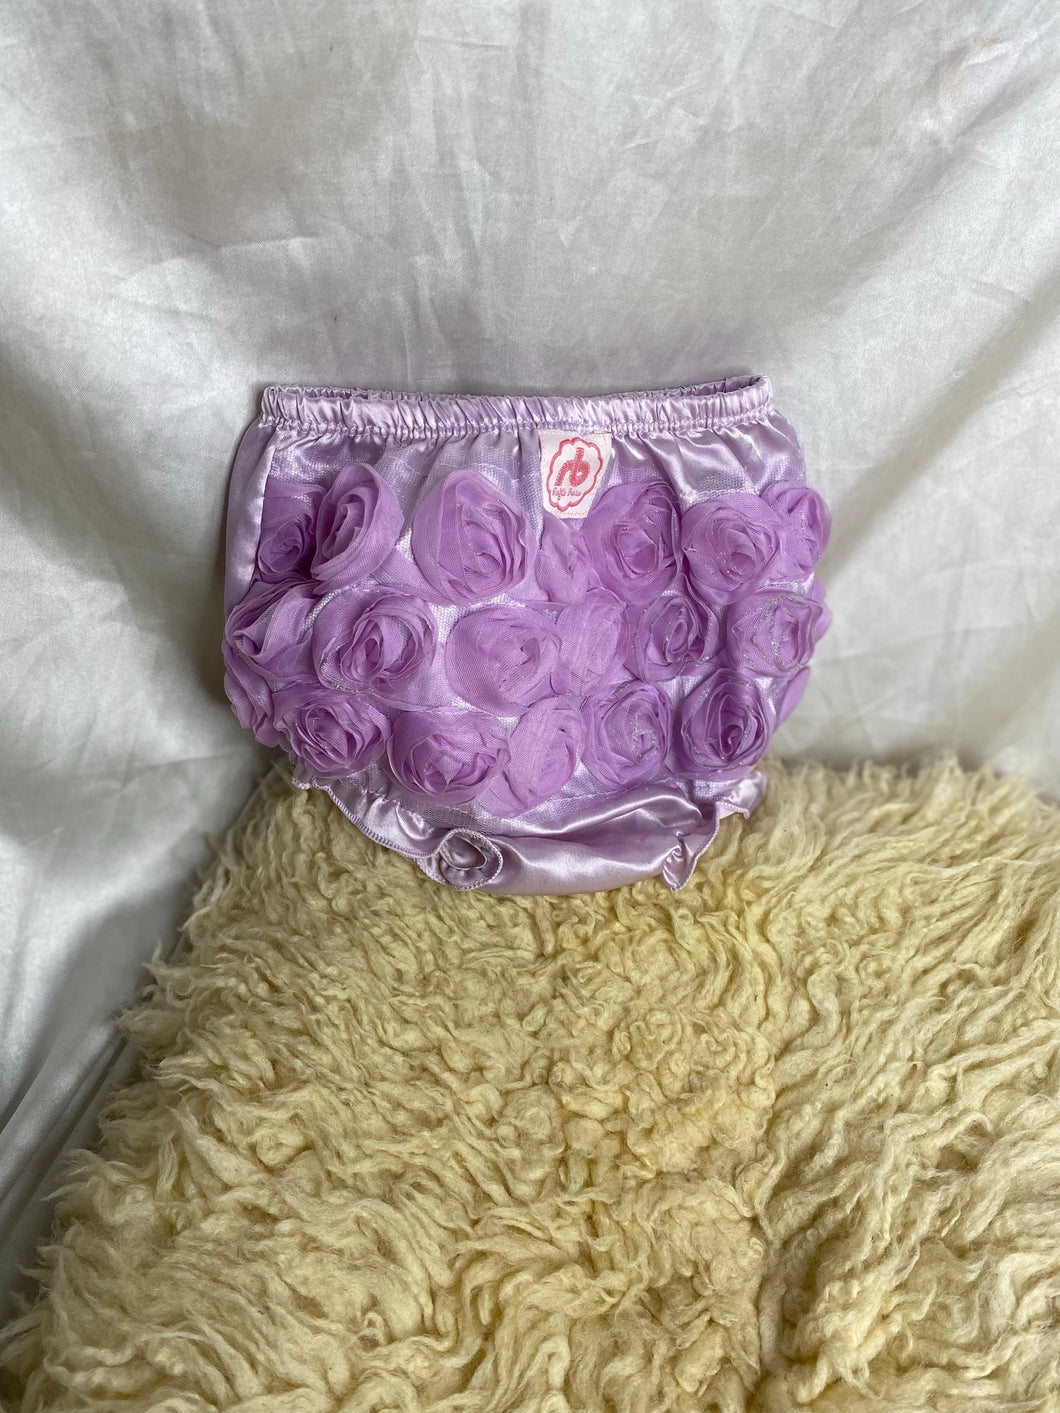 Pom-poms Lilac baby girls pant size 6-24 months